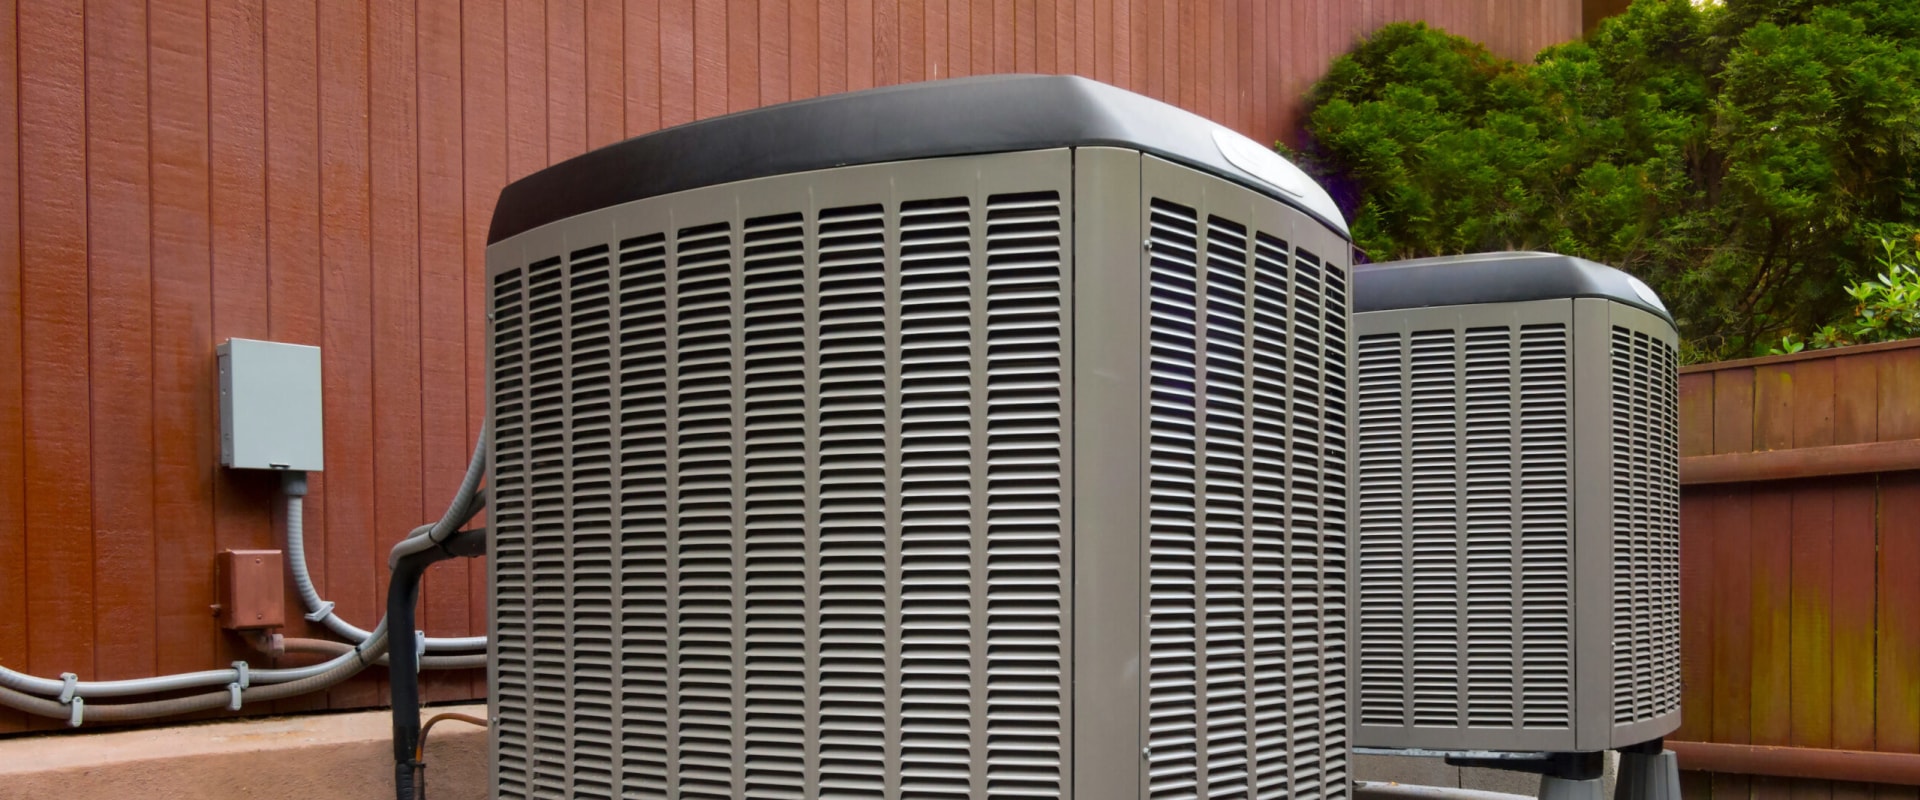 Does the brand of your hvac unit matter?